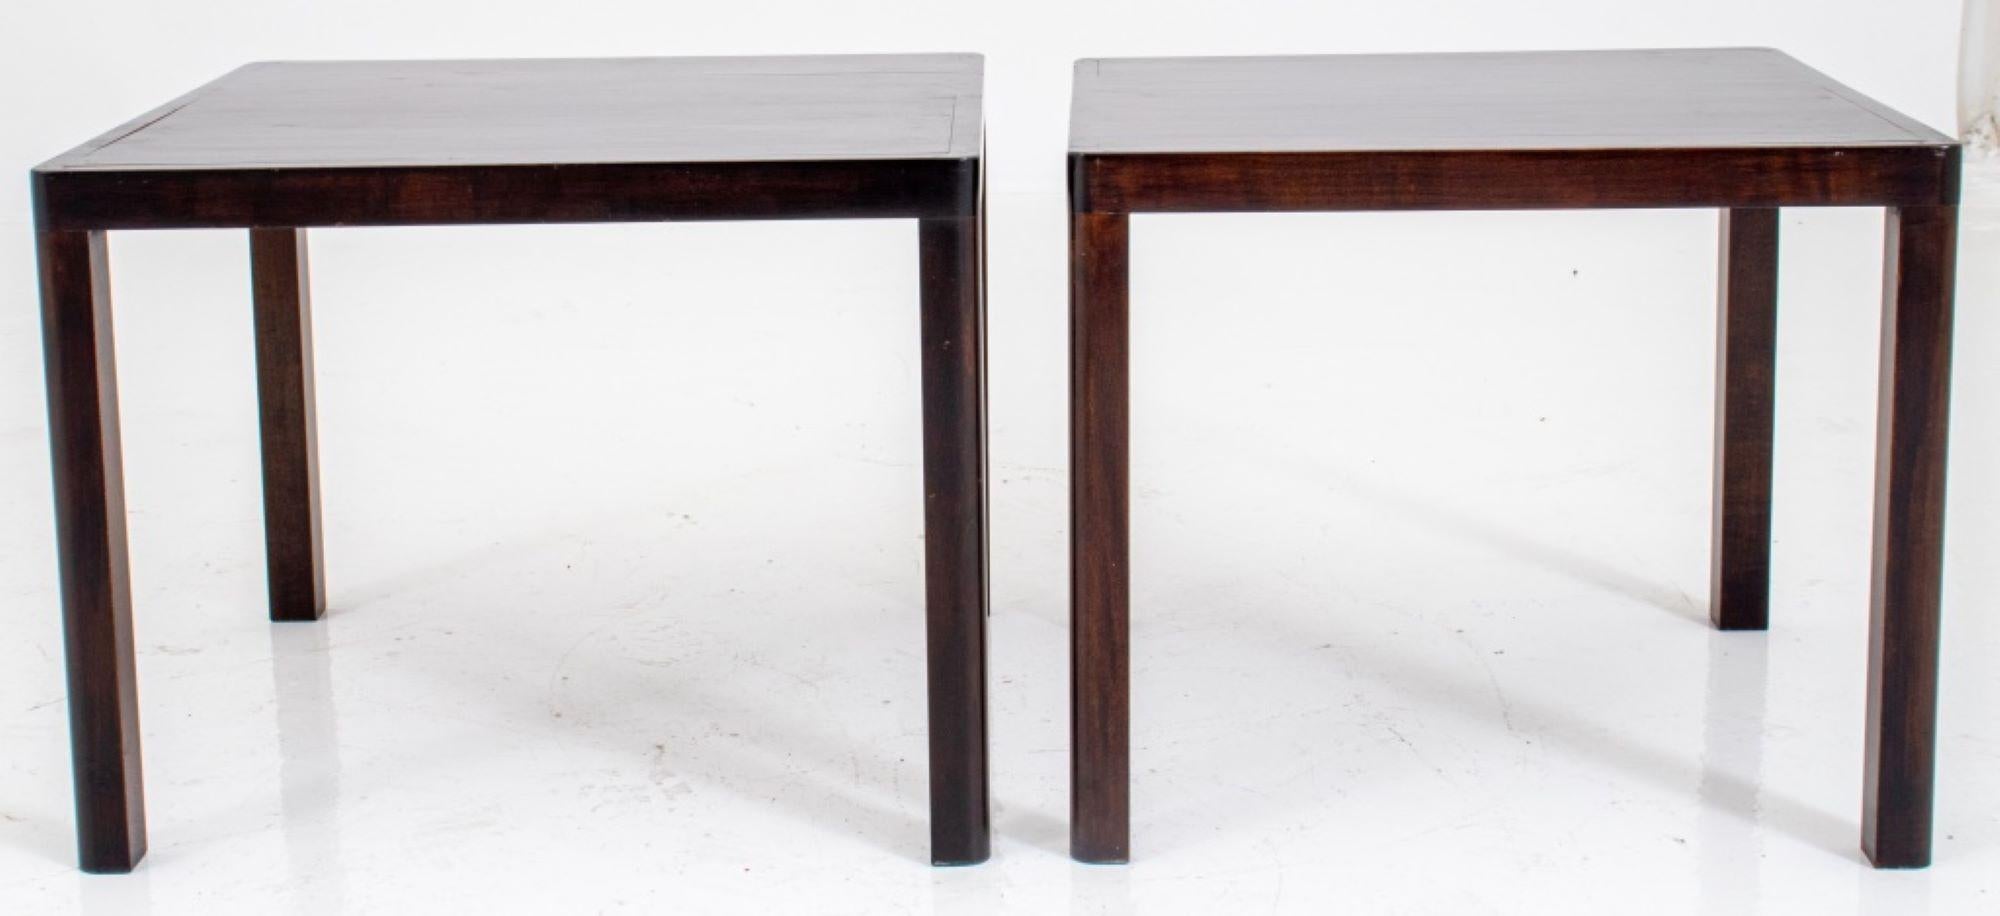 Modernist square mahogany lamp tables, a pair, in the manner of Wormley for Dunbar in a slender Parsons form. Measures: 18